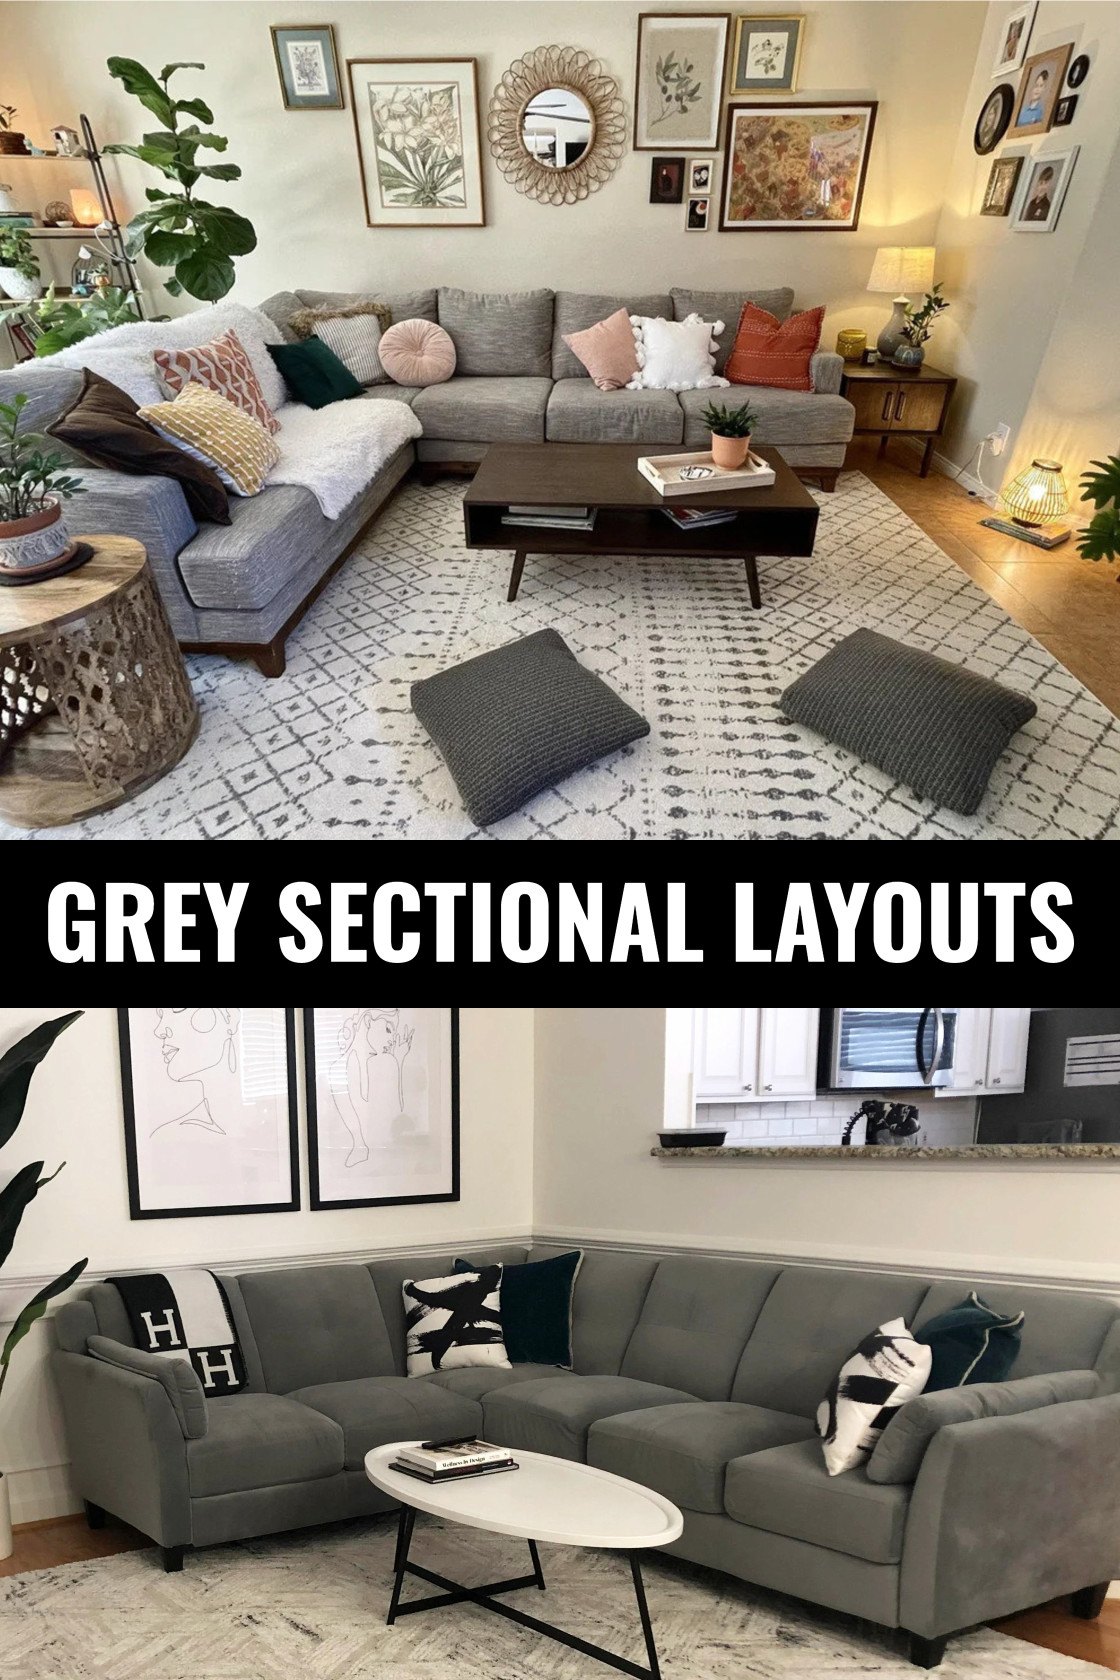 Grey sectional layouts